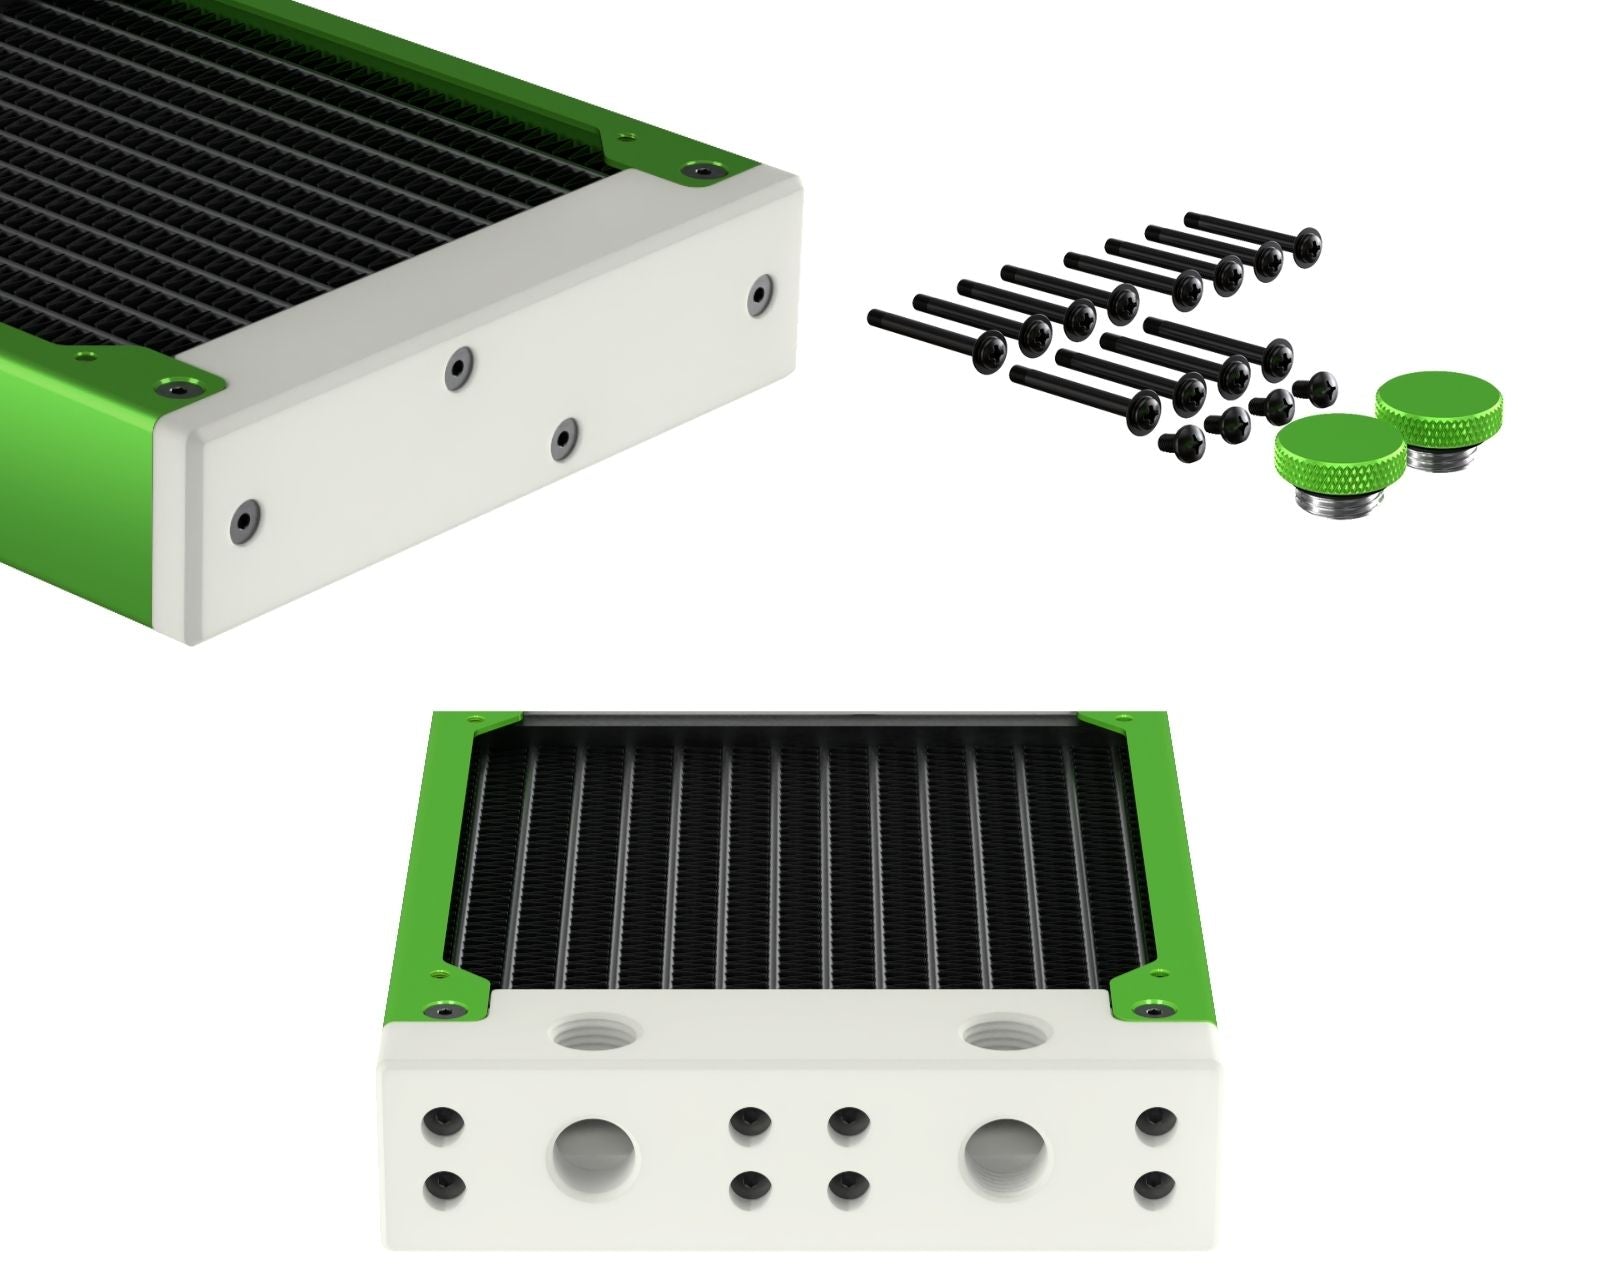 PrimoChill 360SL (30mm) EXIMO Modular Radiator, White POM, 3x120mm, Triple Fan (R-SL-W36) Available in 20+ Colors, Assembled in USA and Custom Watercooling Loop Ready - Toxic Candy